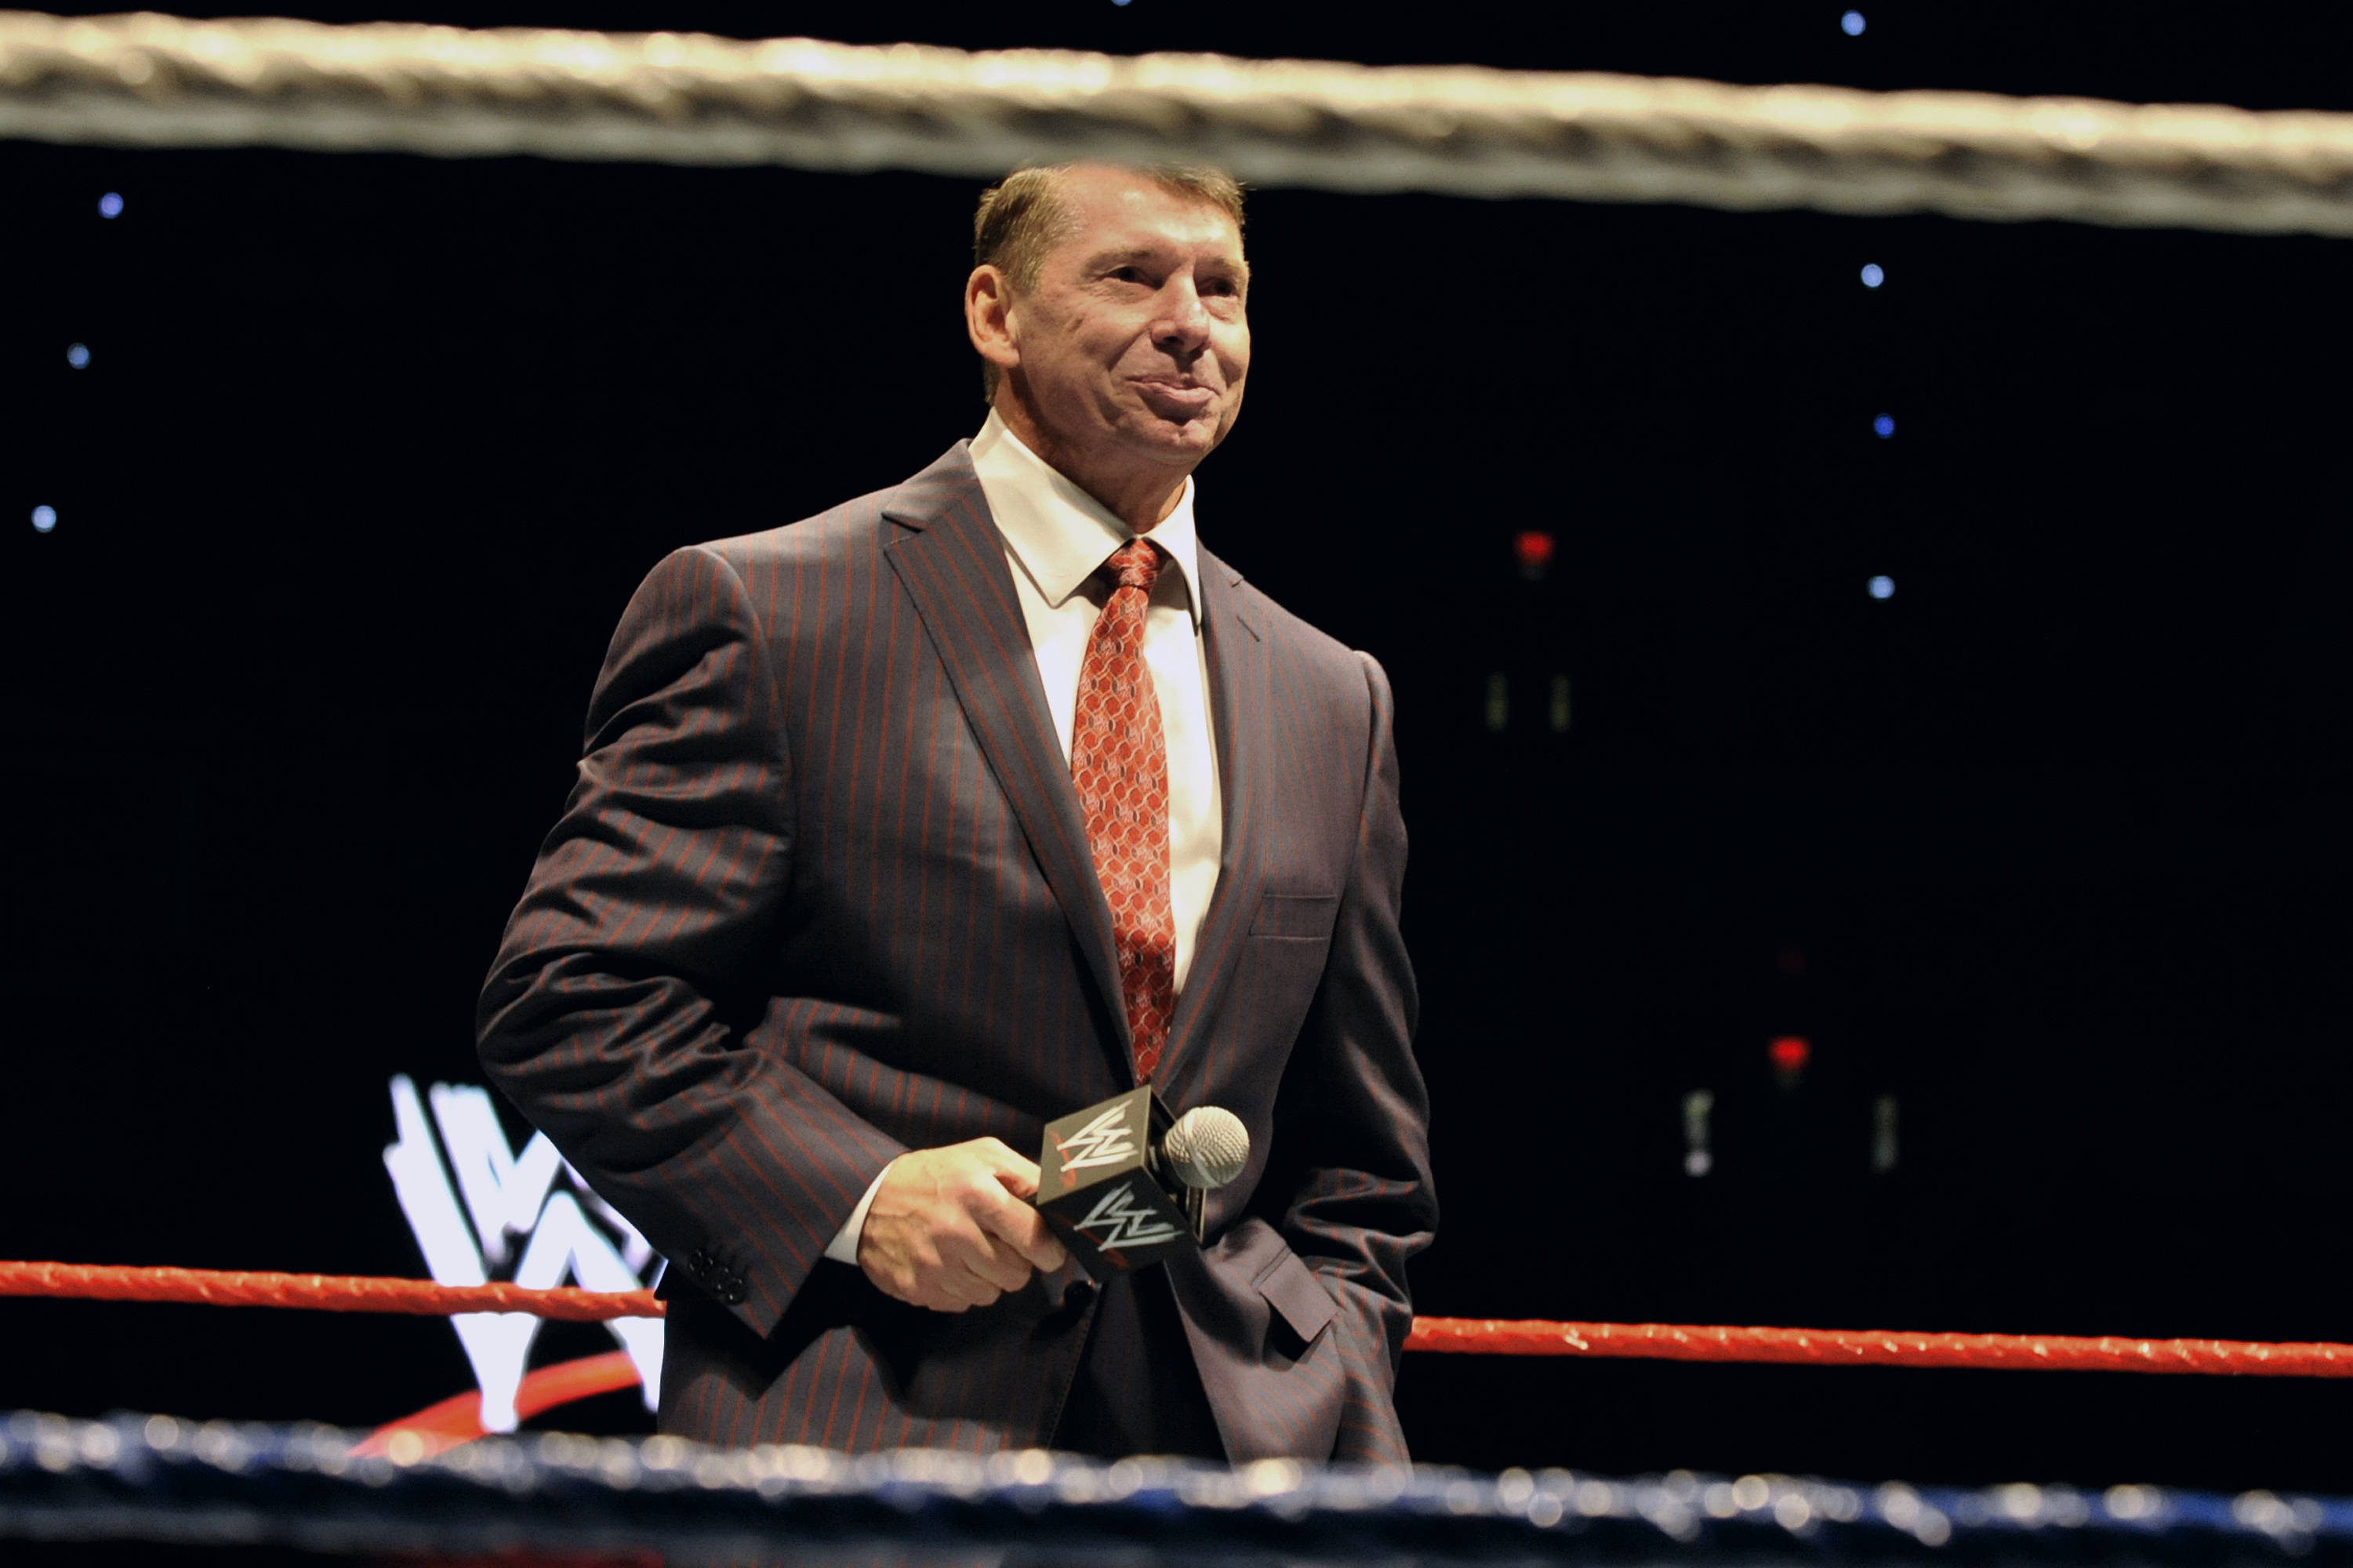 WWE's Vince McMahon Resigns Amid Sexual Misconduct